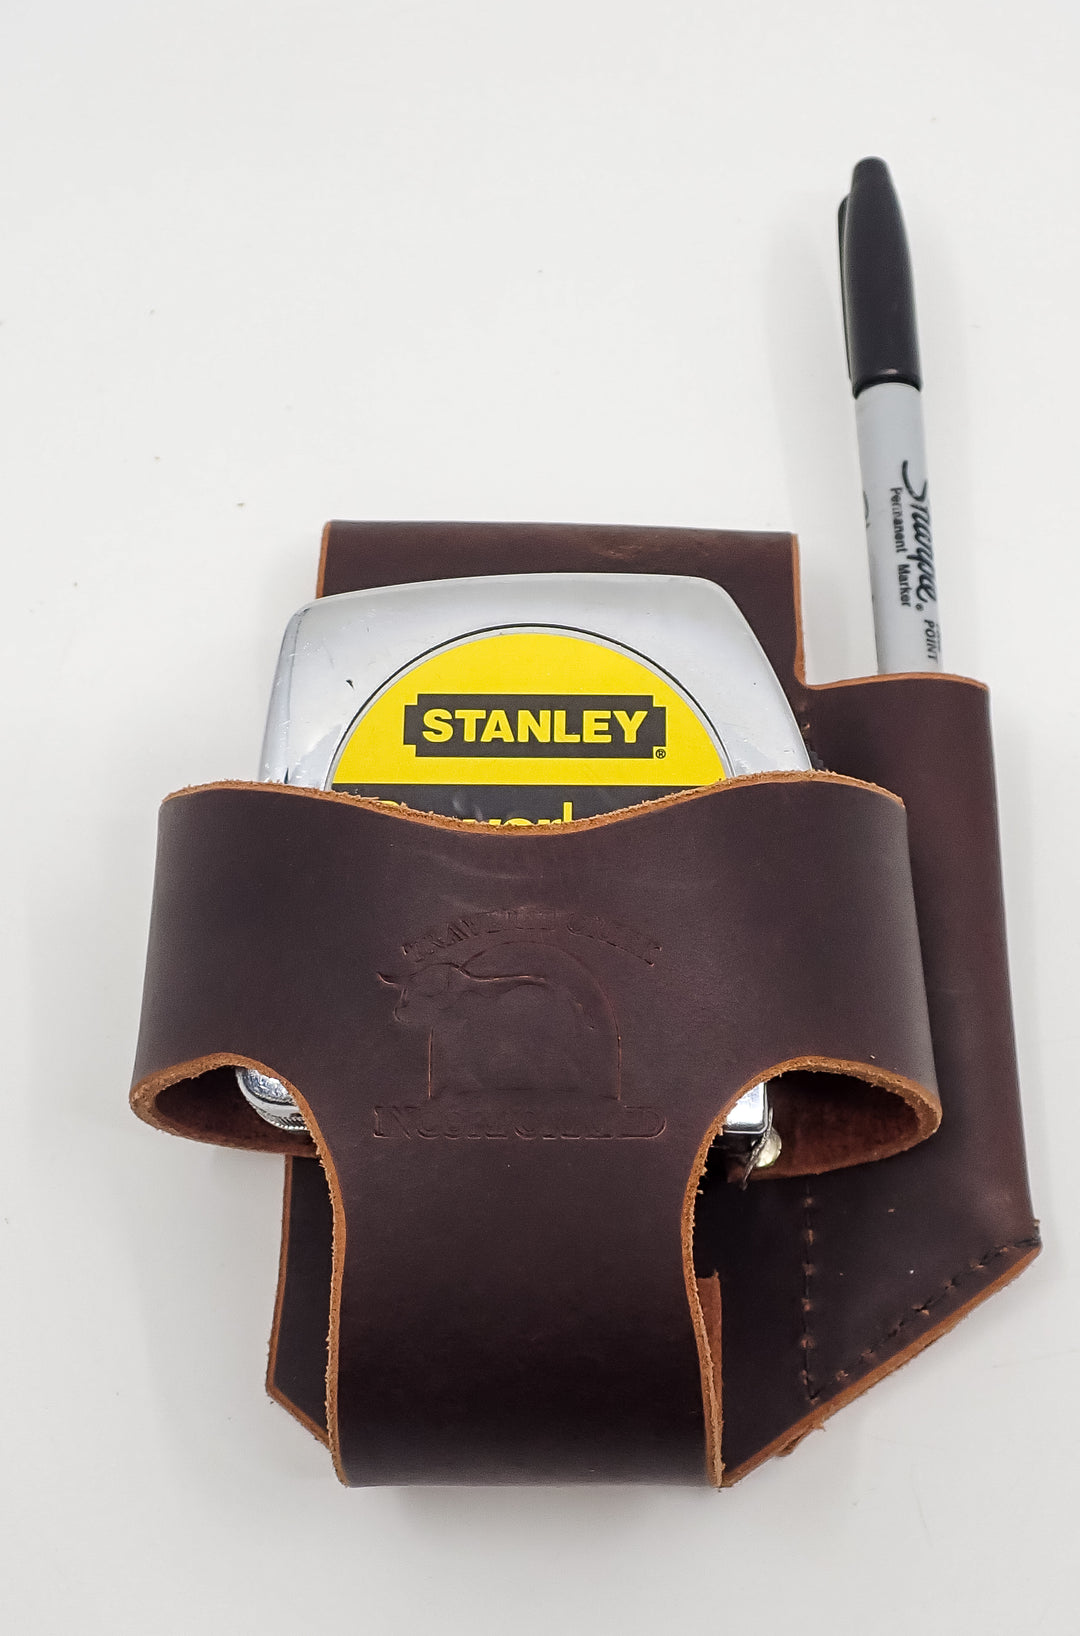 RUGGED HEAVY DUTY LEATHER TAPE MEASURE CARPENTERS PENCIL HOLSTER MADE IN USA